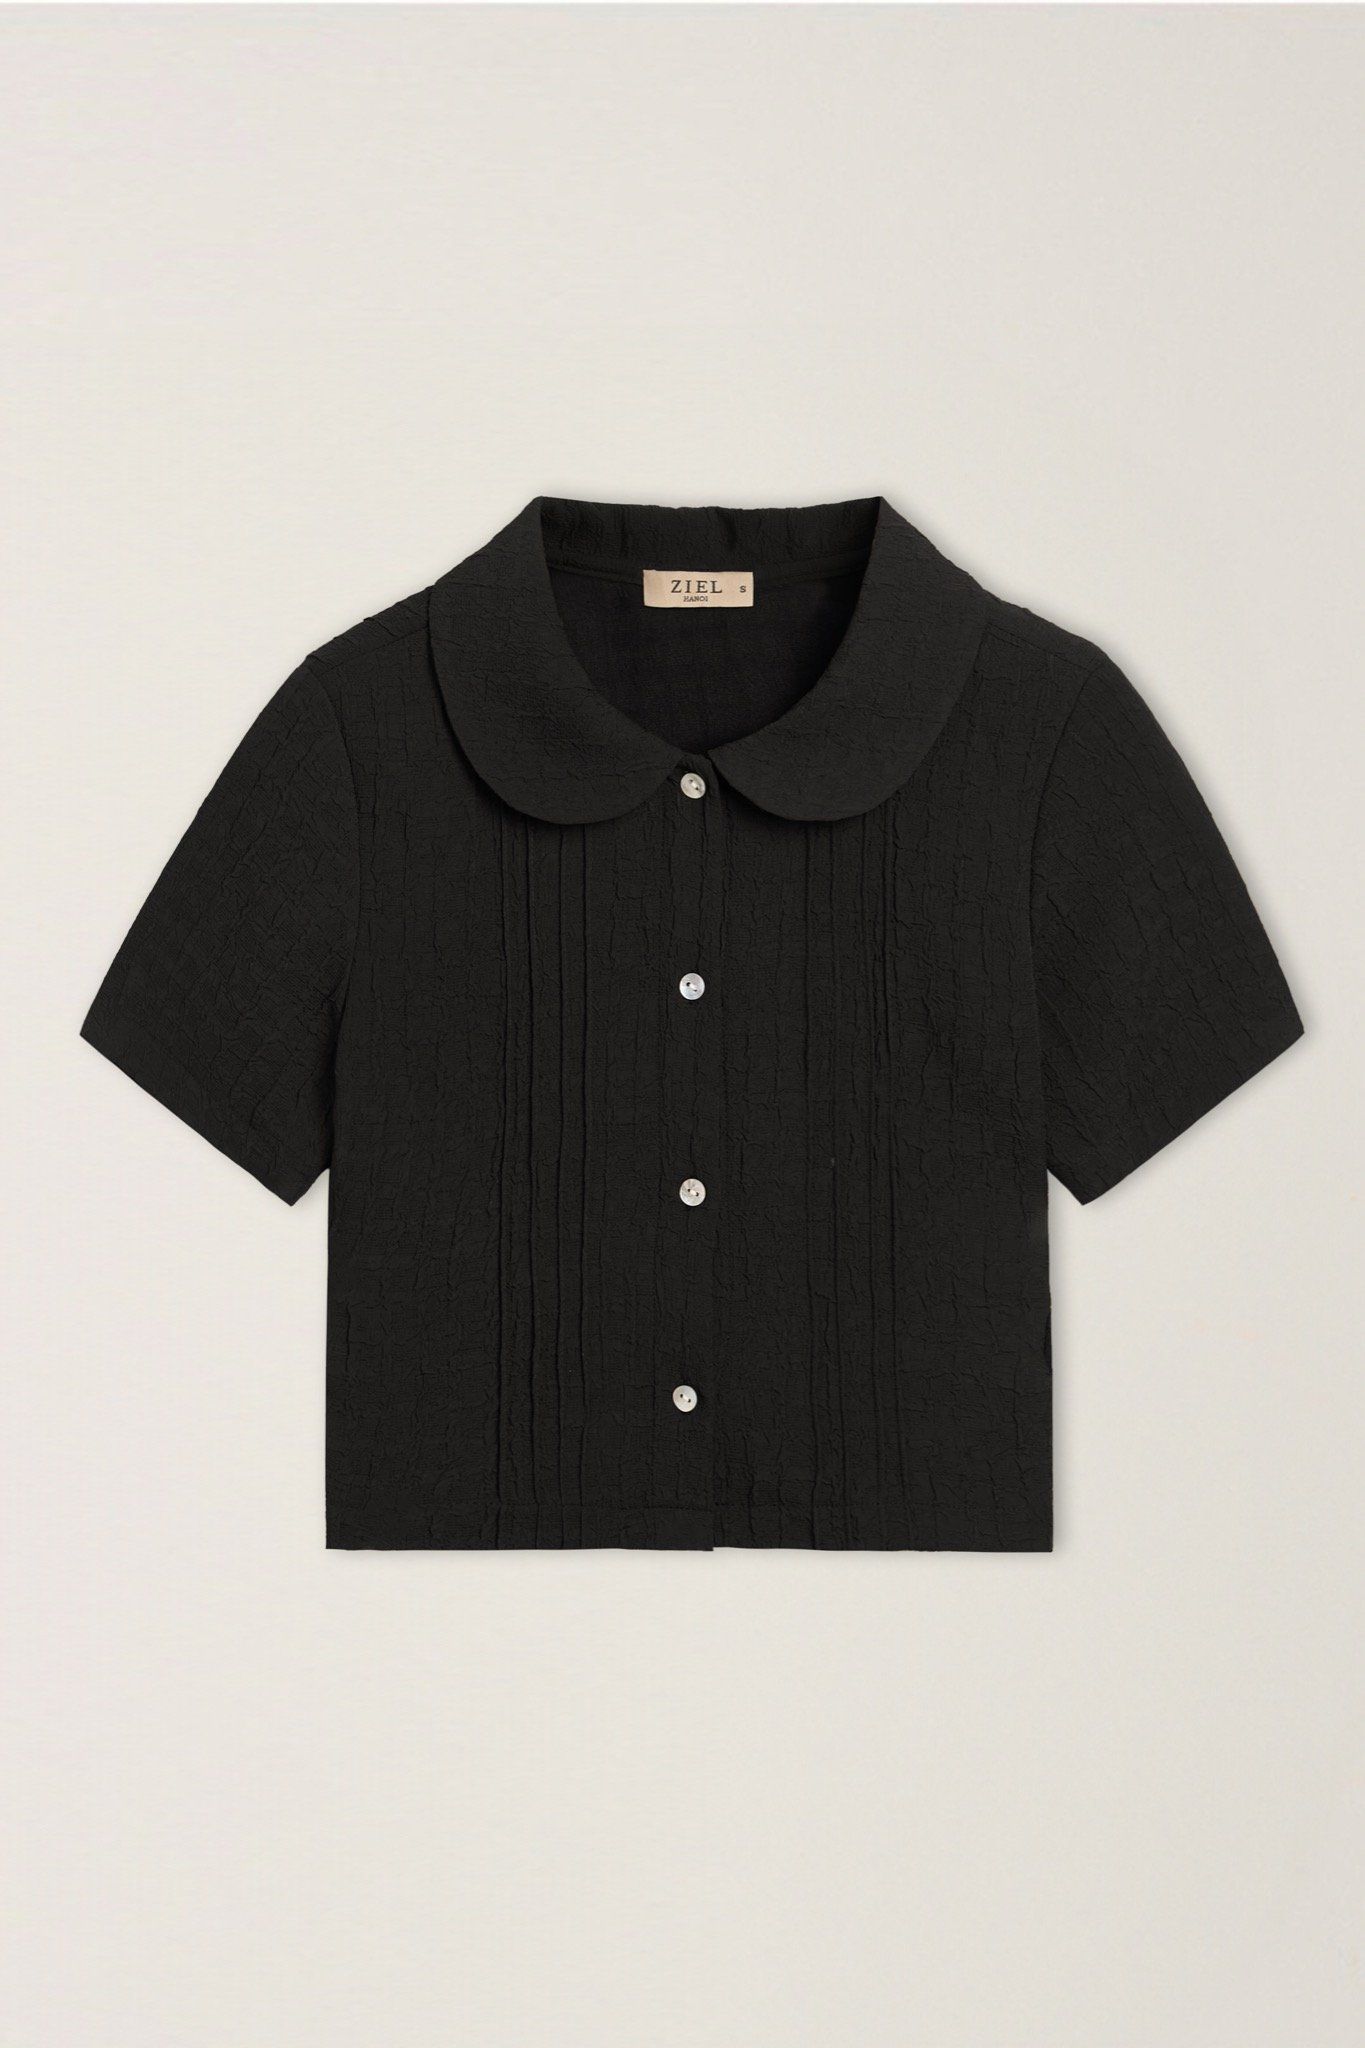  Cheese Top - Black 